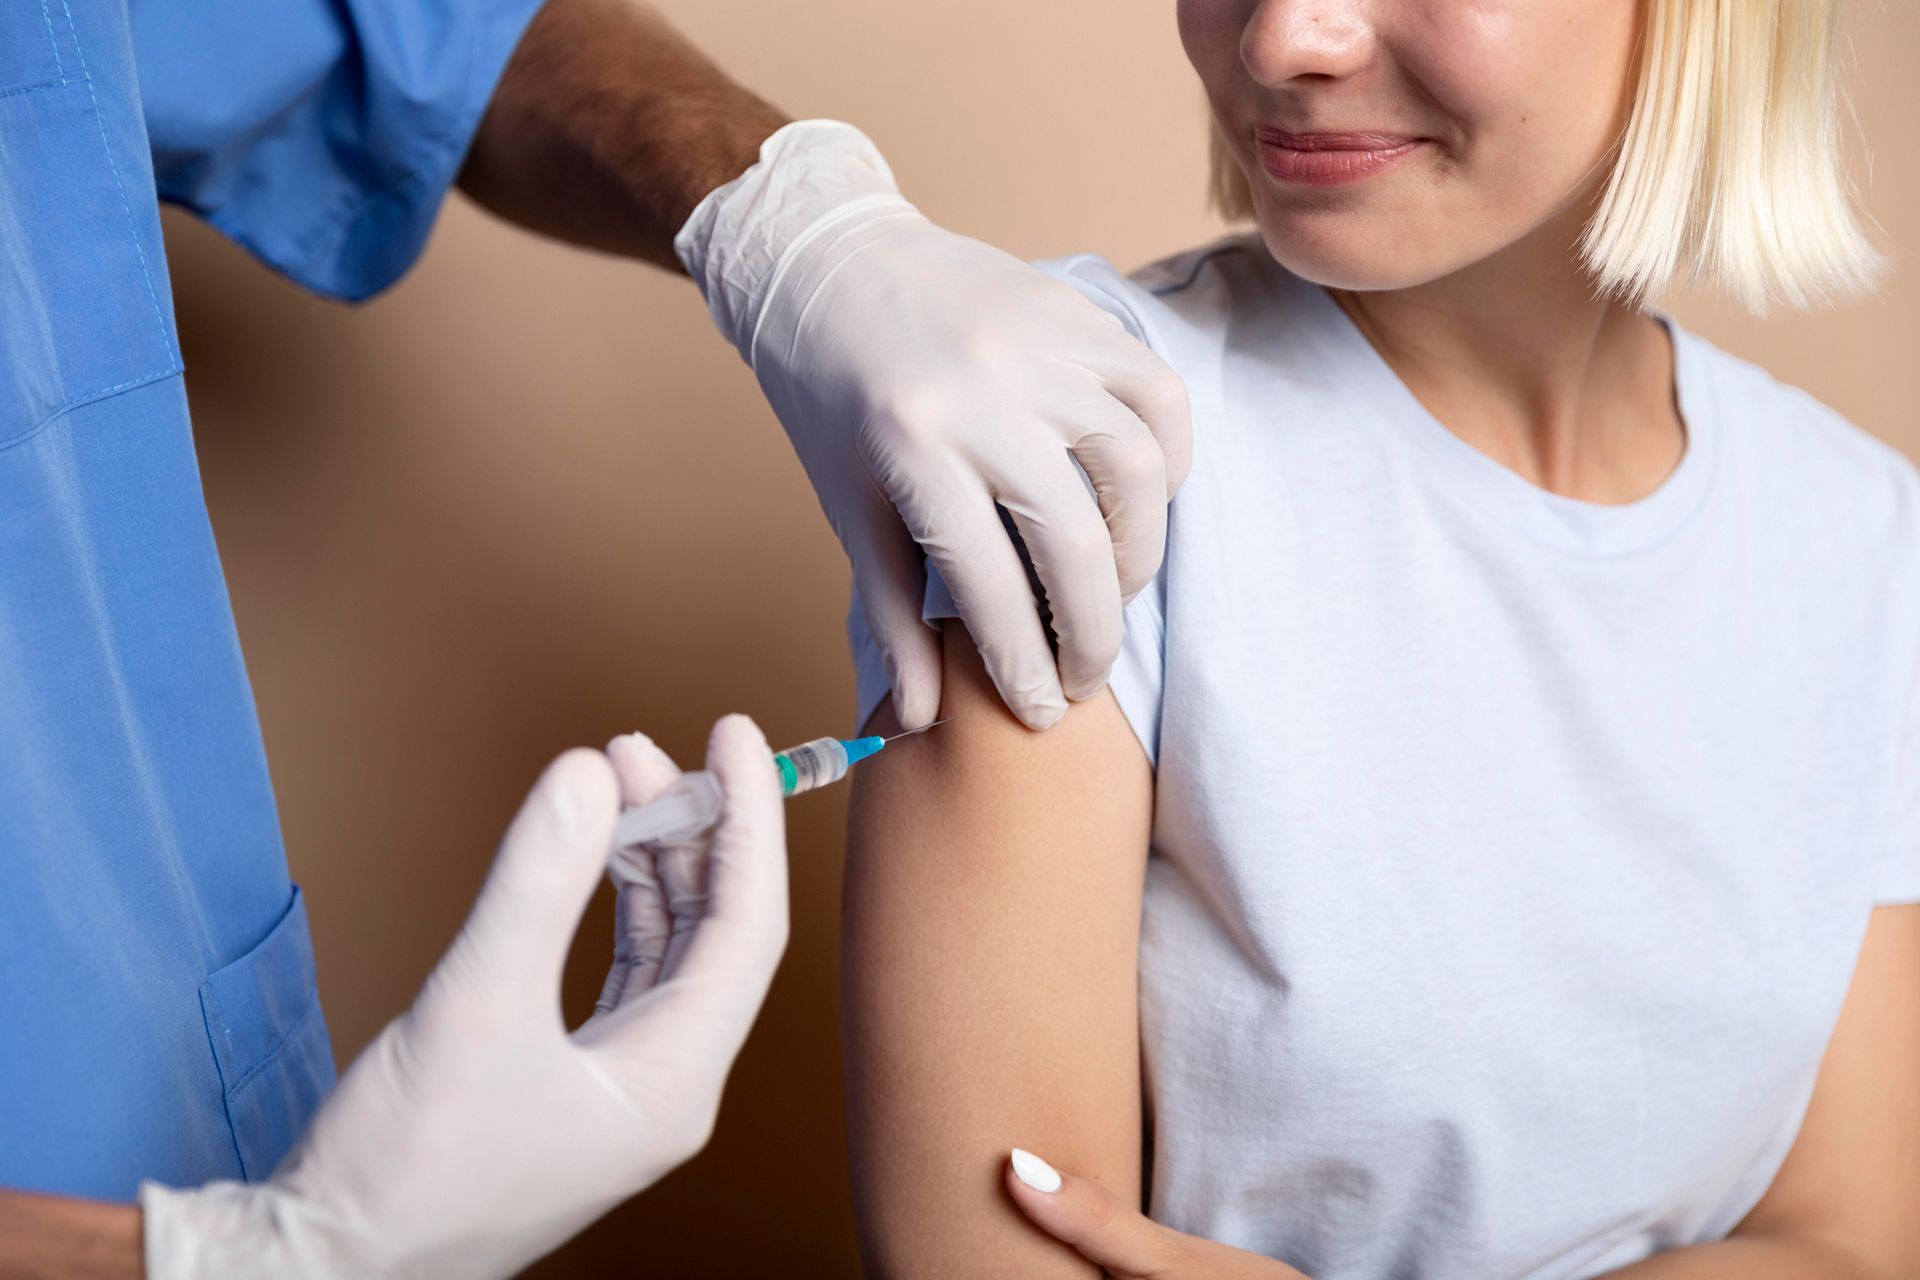 A woman is getting an injection in her arm.